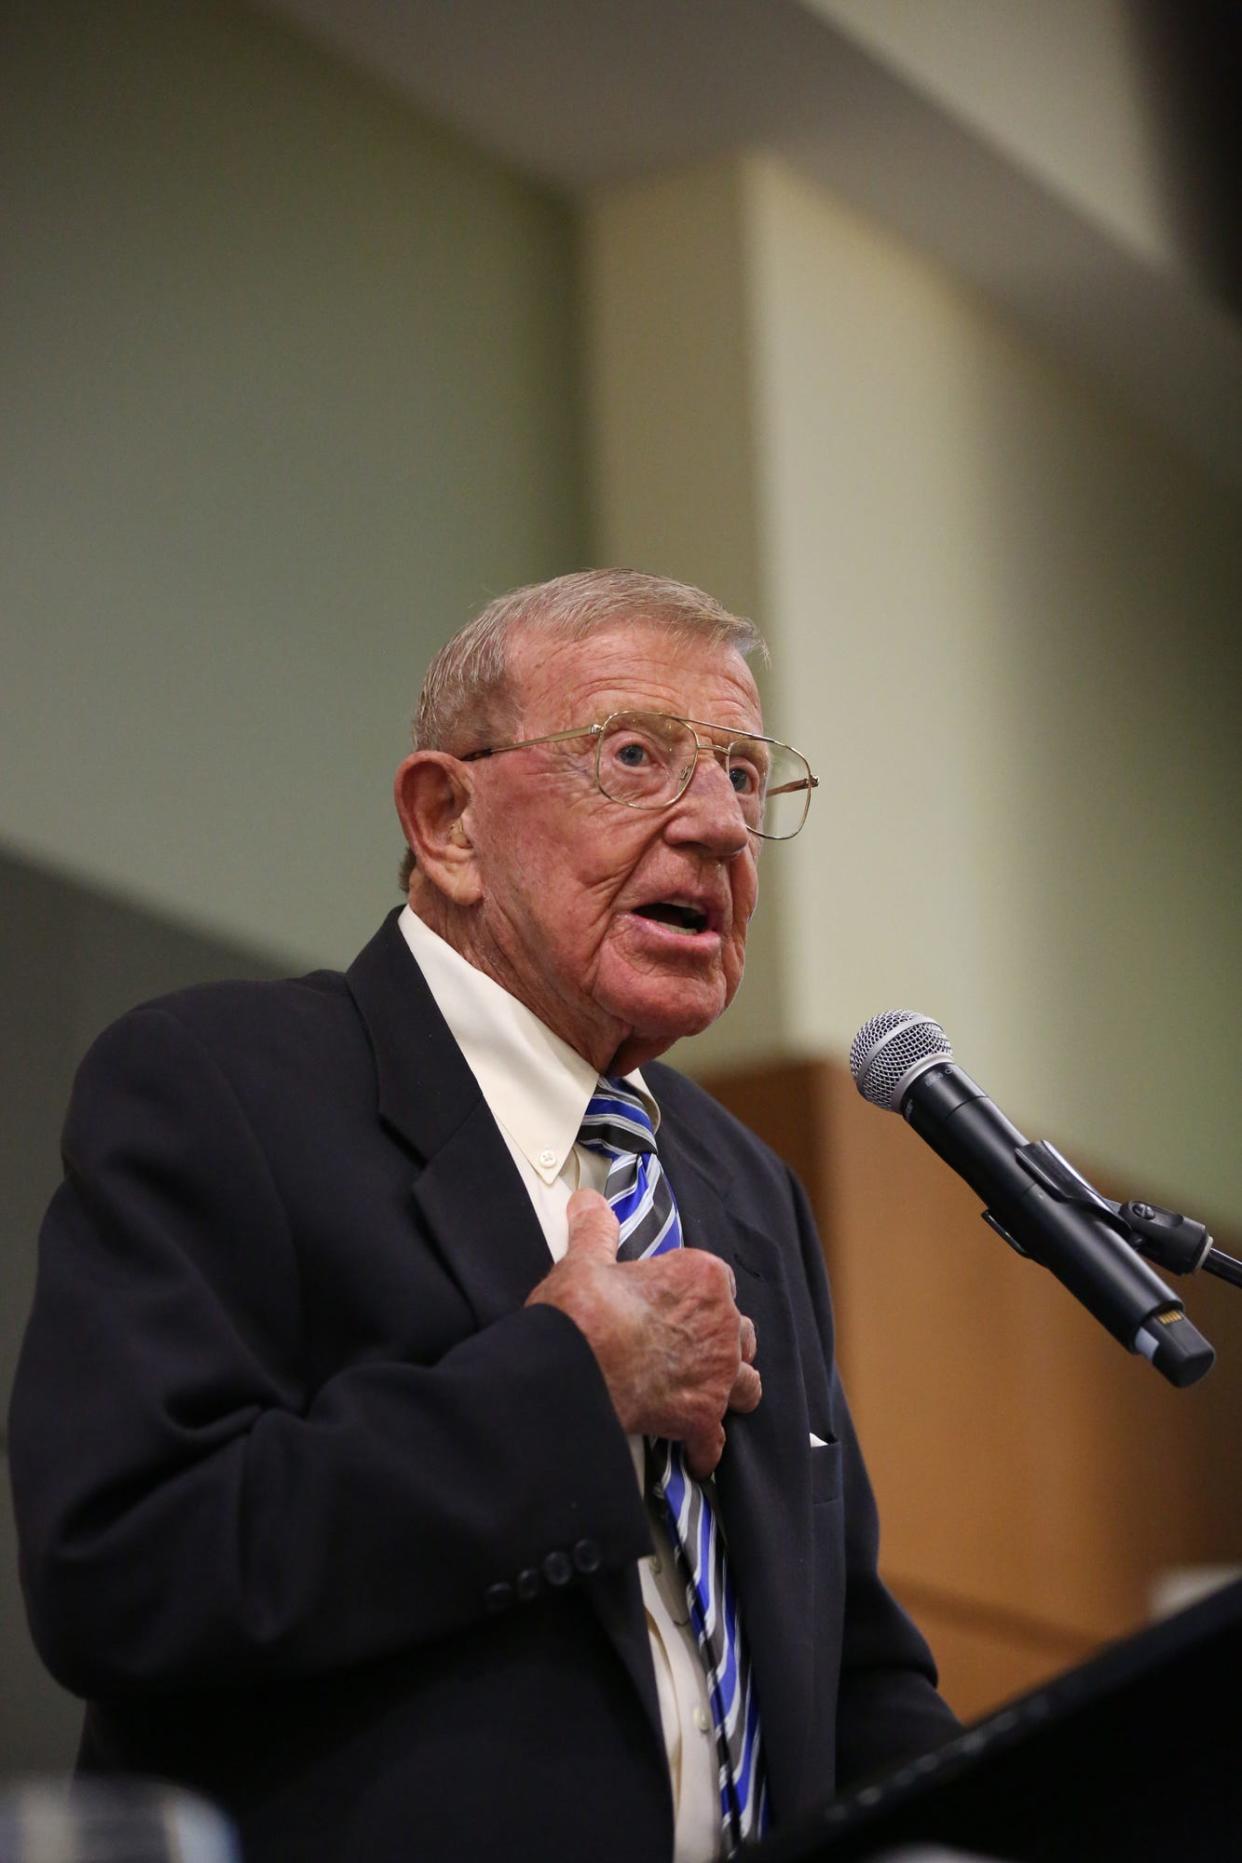 The 2020 Gaston County Sports Hall of Fame banquet was held on October 16, 2021 at the Gastonia Conference Center. The keynote speaker was former Notre Dame, South Carolina, and NC State head coach and College Football Hall of Famer Lou Holtz. (Brian Mayhew / Special to the Gazette)